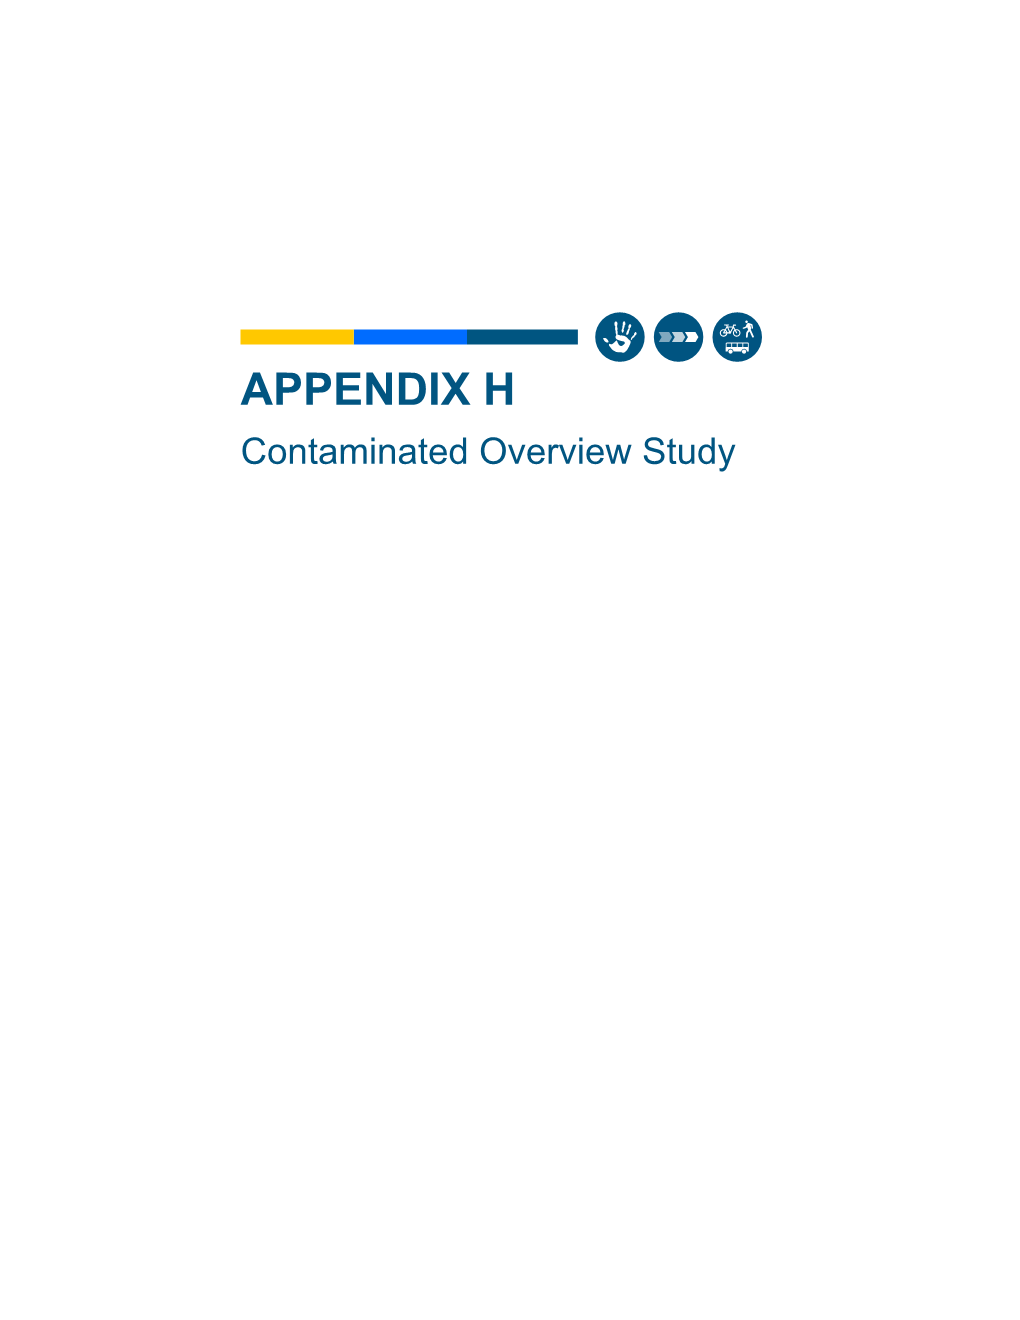 APPENDIX H Contaminated Overview Study